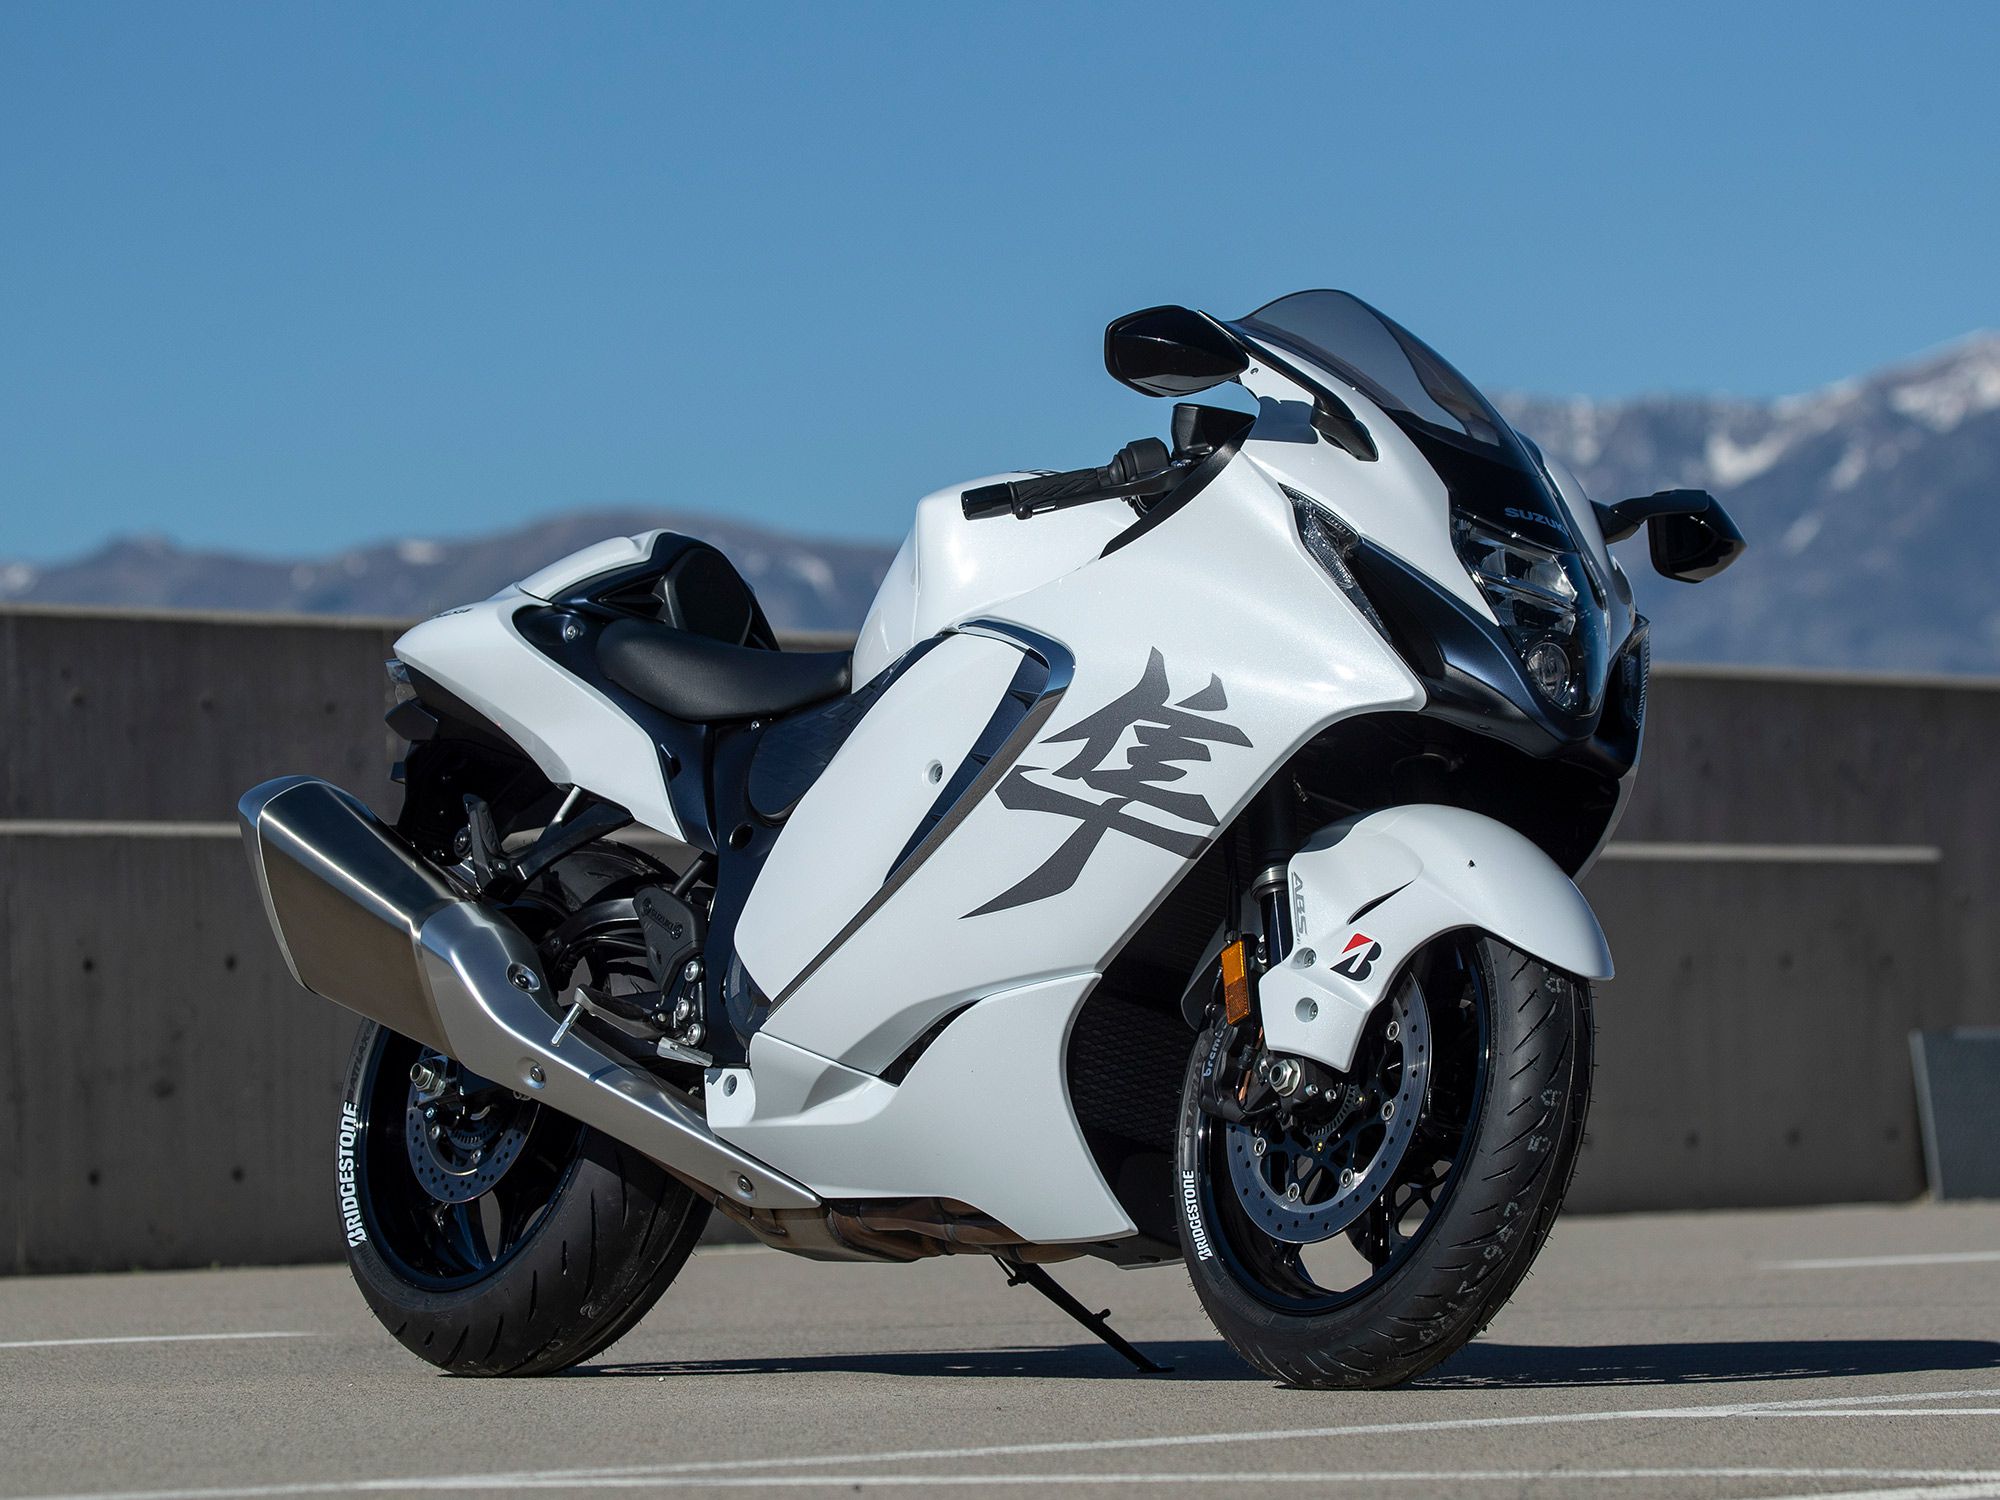 Suzuki’s 2022 Hayabusa ($18,599) represents the top of the spear in its current motorcycle model line-up.